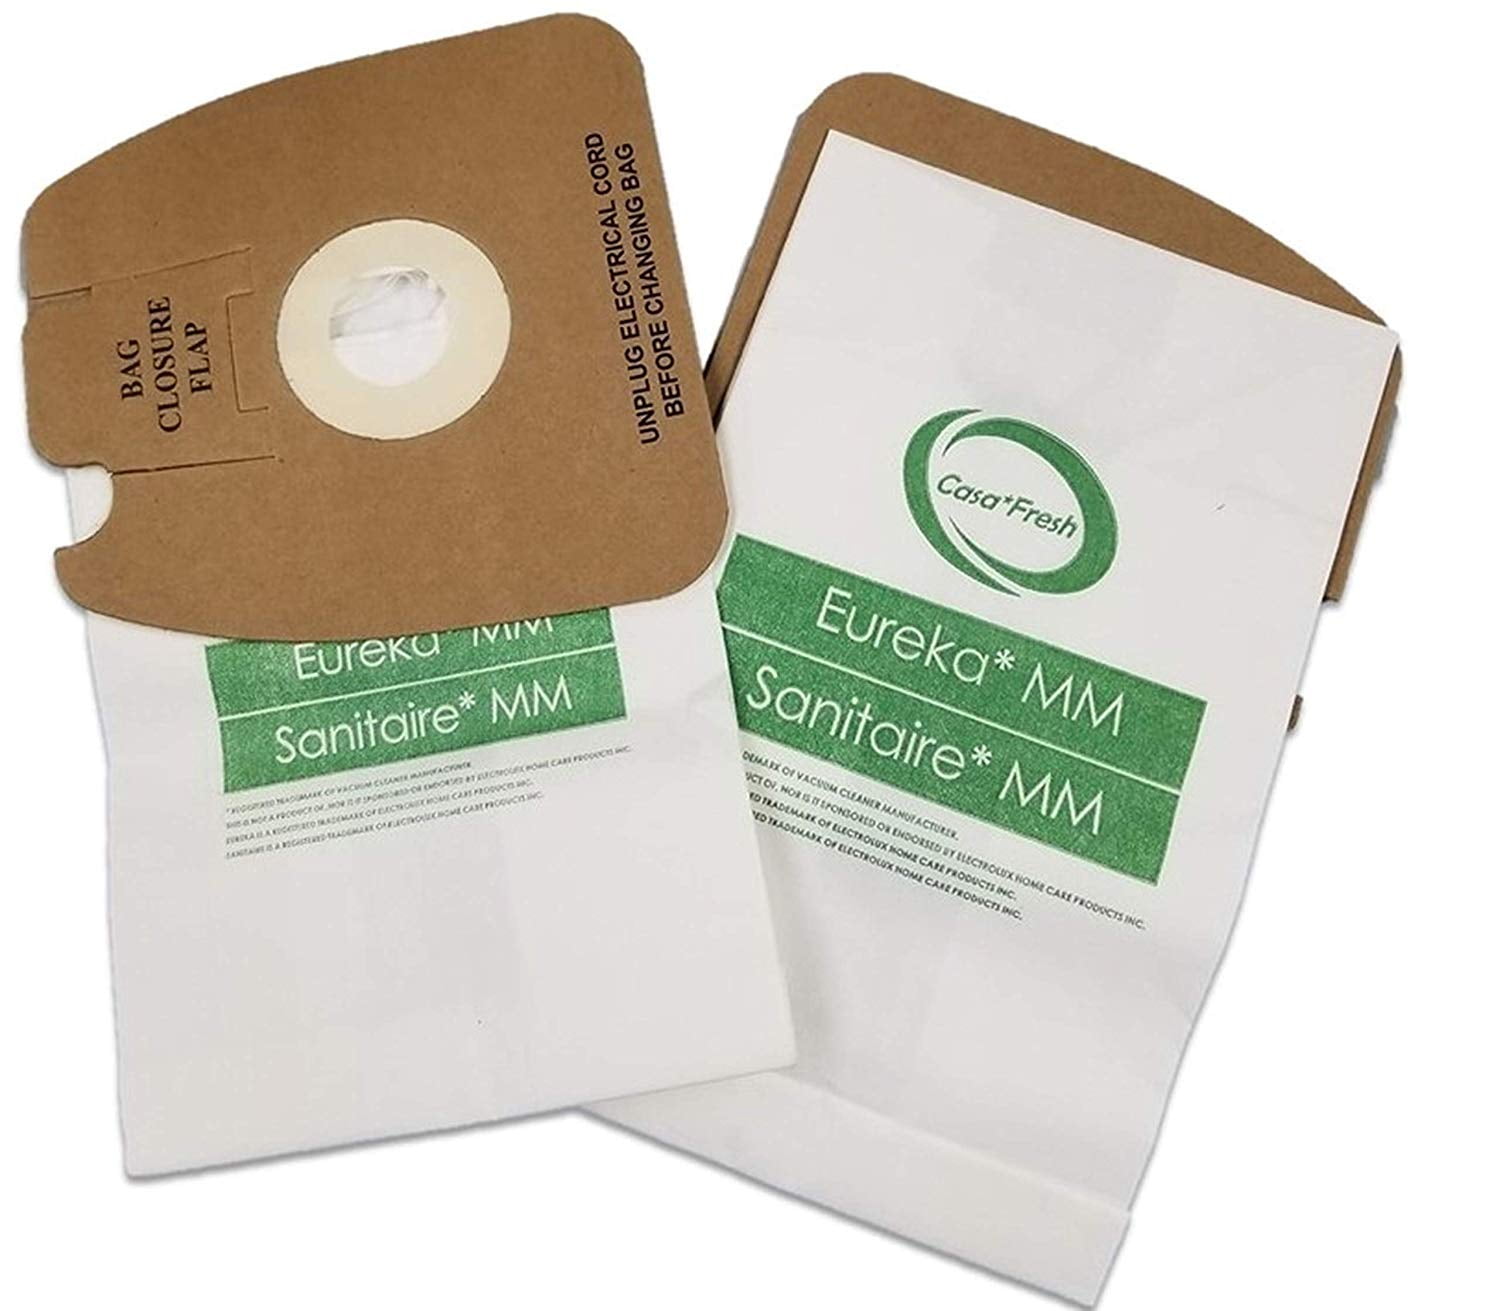 Lot of 4 Eureka Mighty Mite Style C Disposable Vacuum Bags VIP9020 No.50 